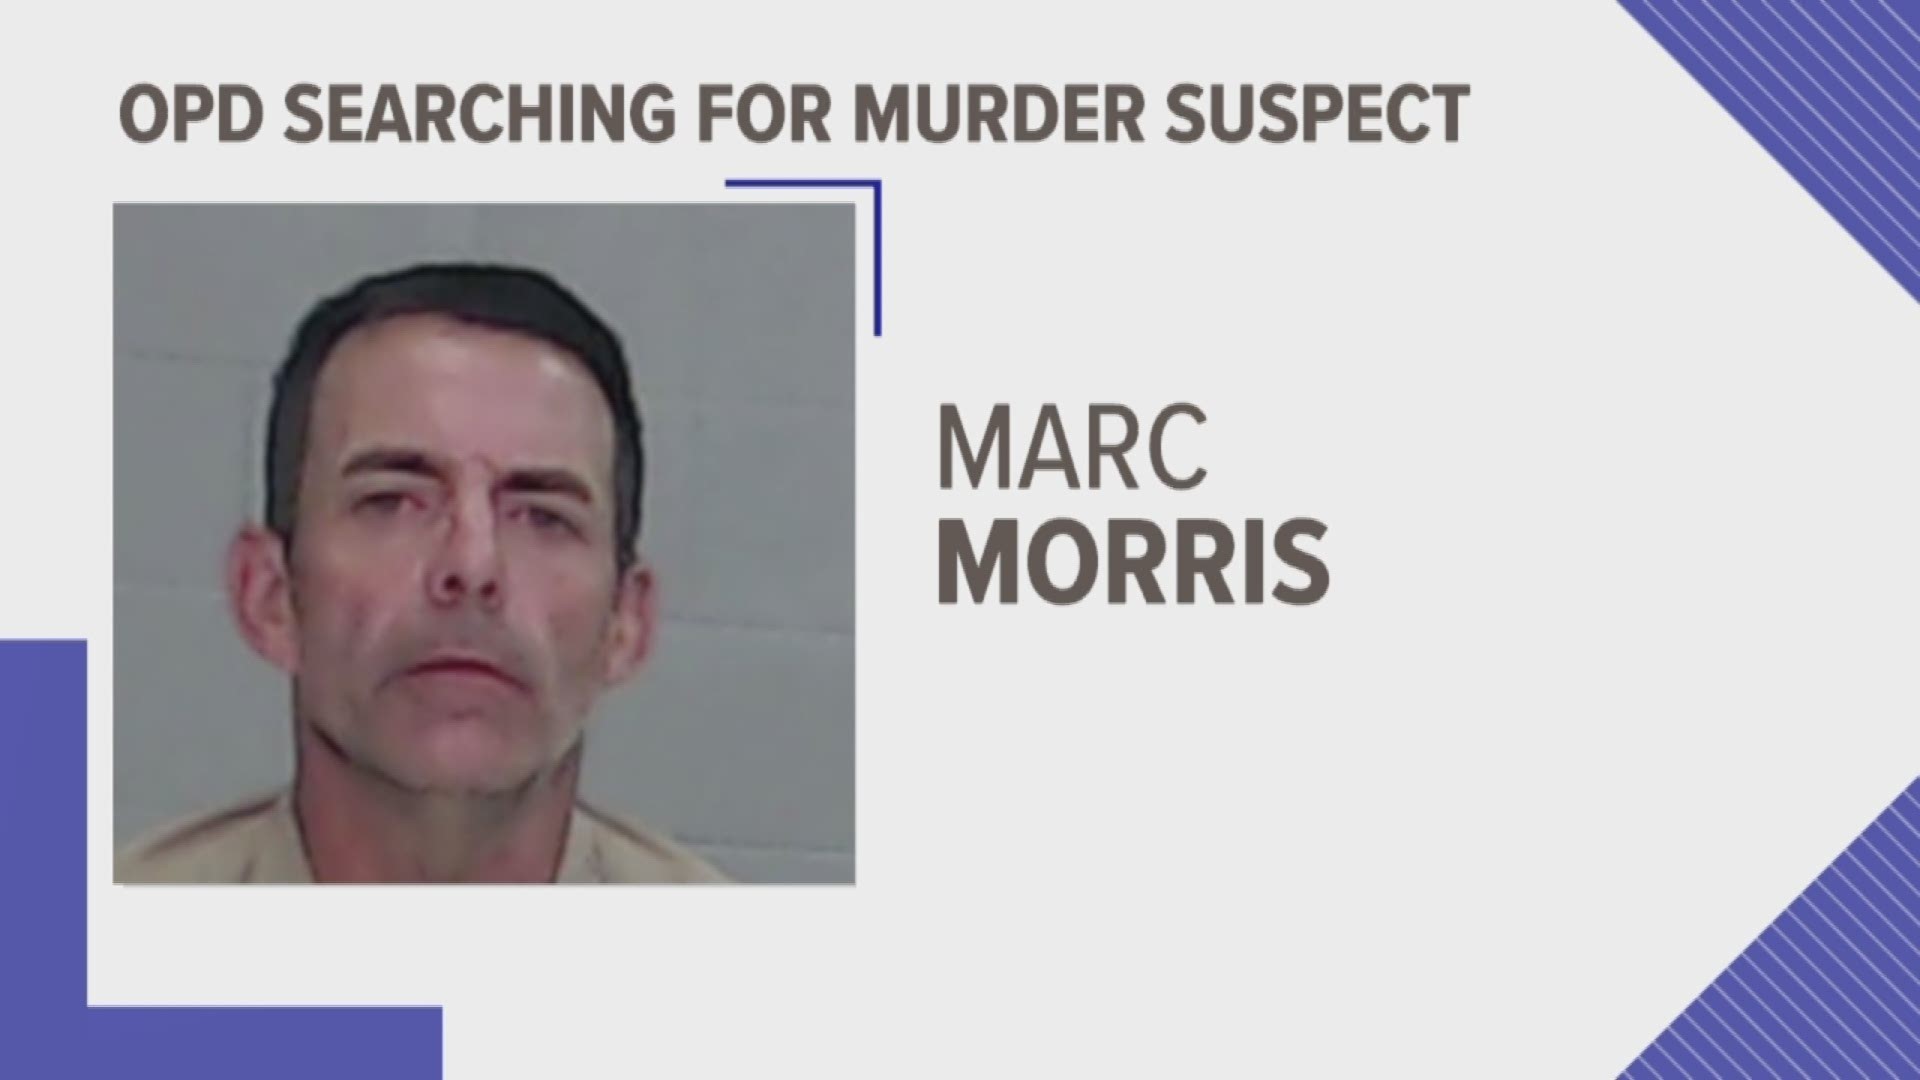 44-year-old Marc James Morris is wanted for questioning